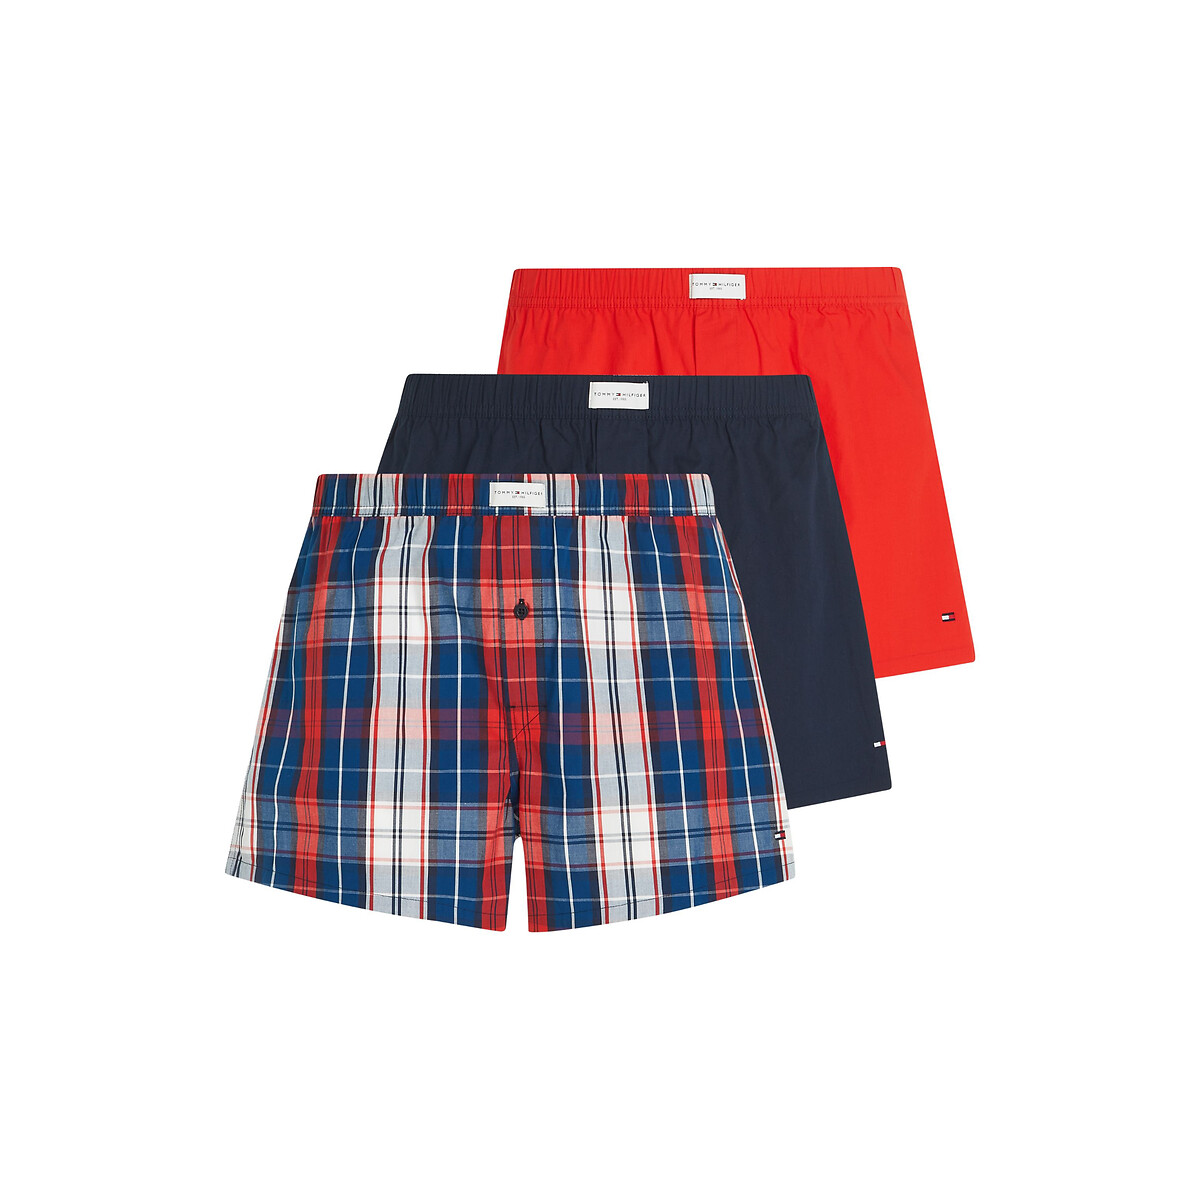 Pack of 3 Boxers in Cotton, 2 Plain/1 Checked